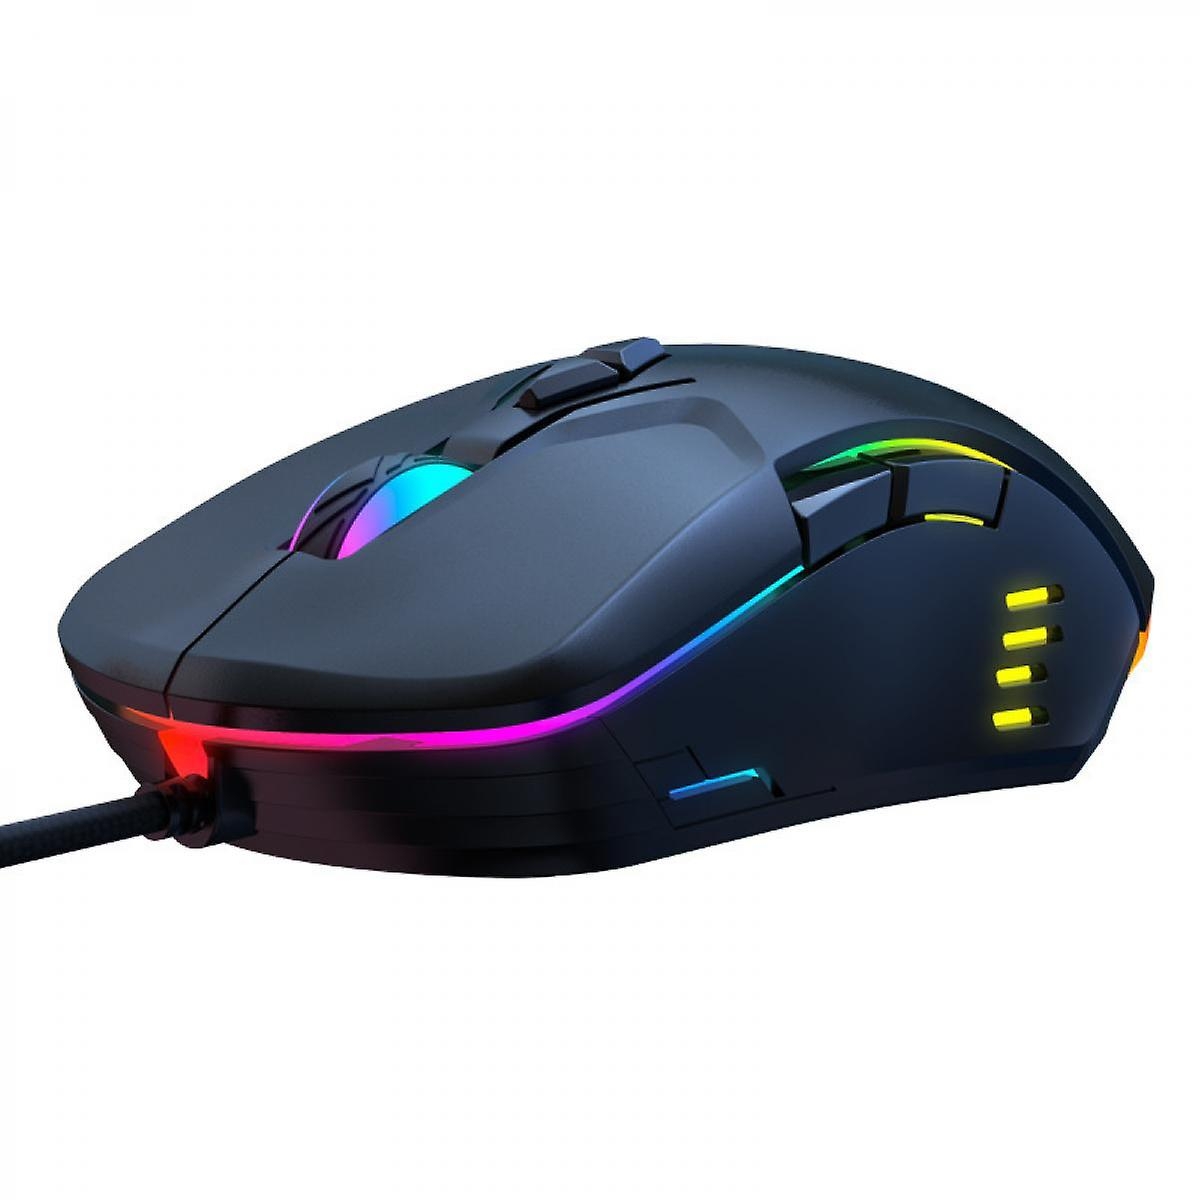 how-to-change-color-on-the-pictek-gaming-mouse-wired